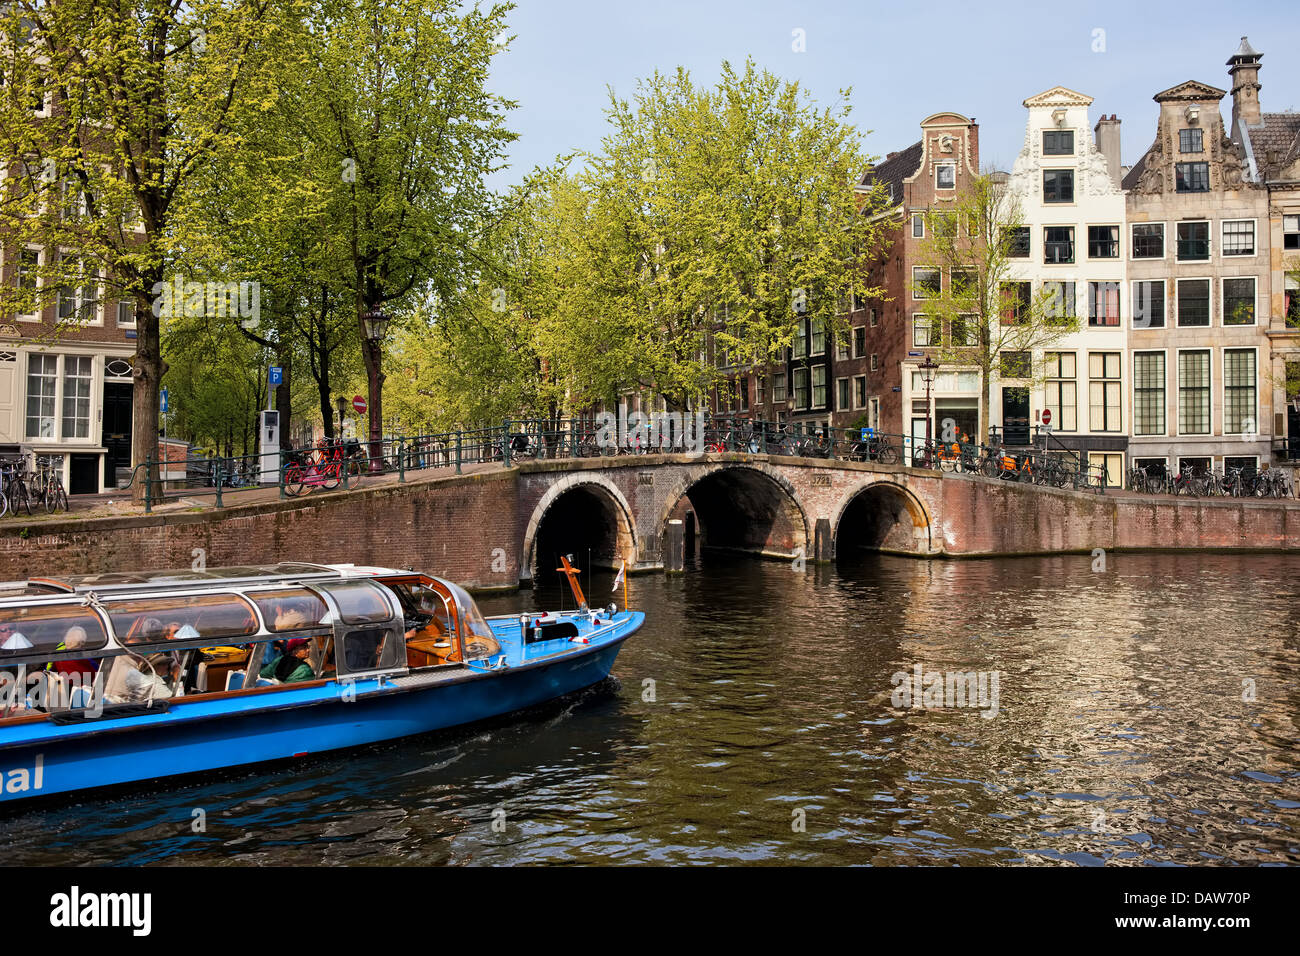 Picturesque scenery of Herengracht canal in the city of Amsterdam, Holland. Stock Photo